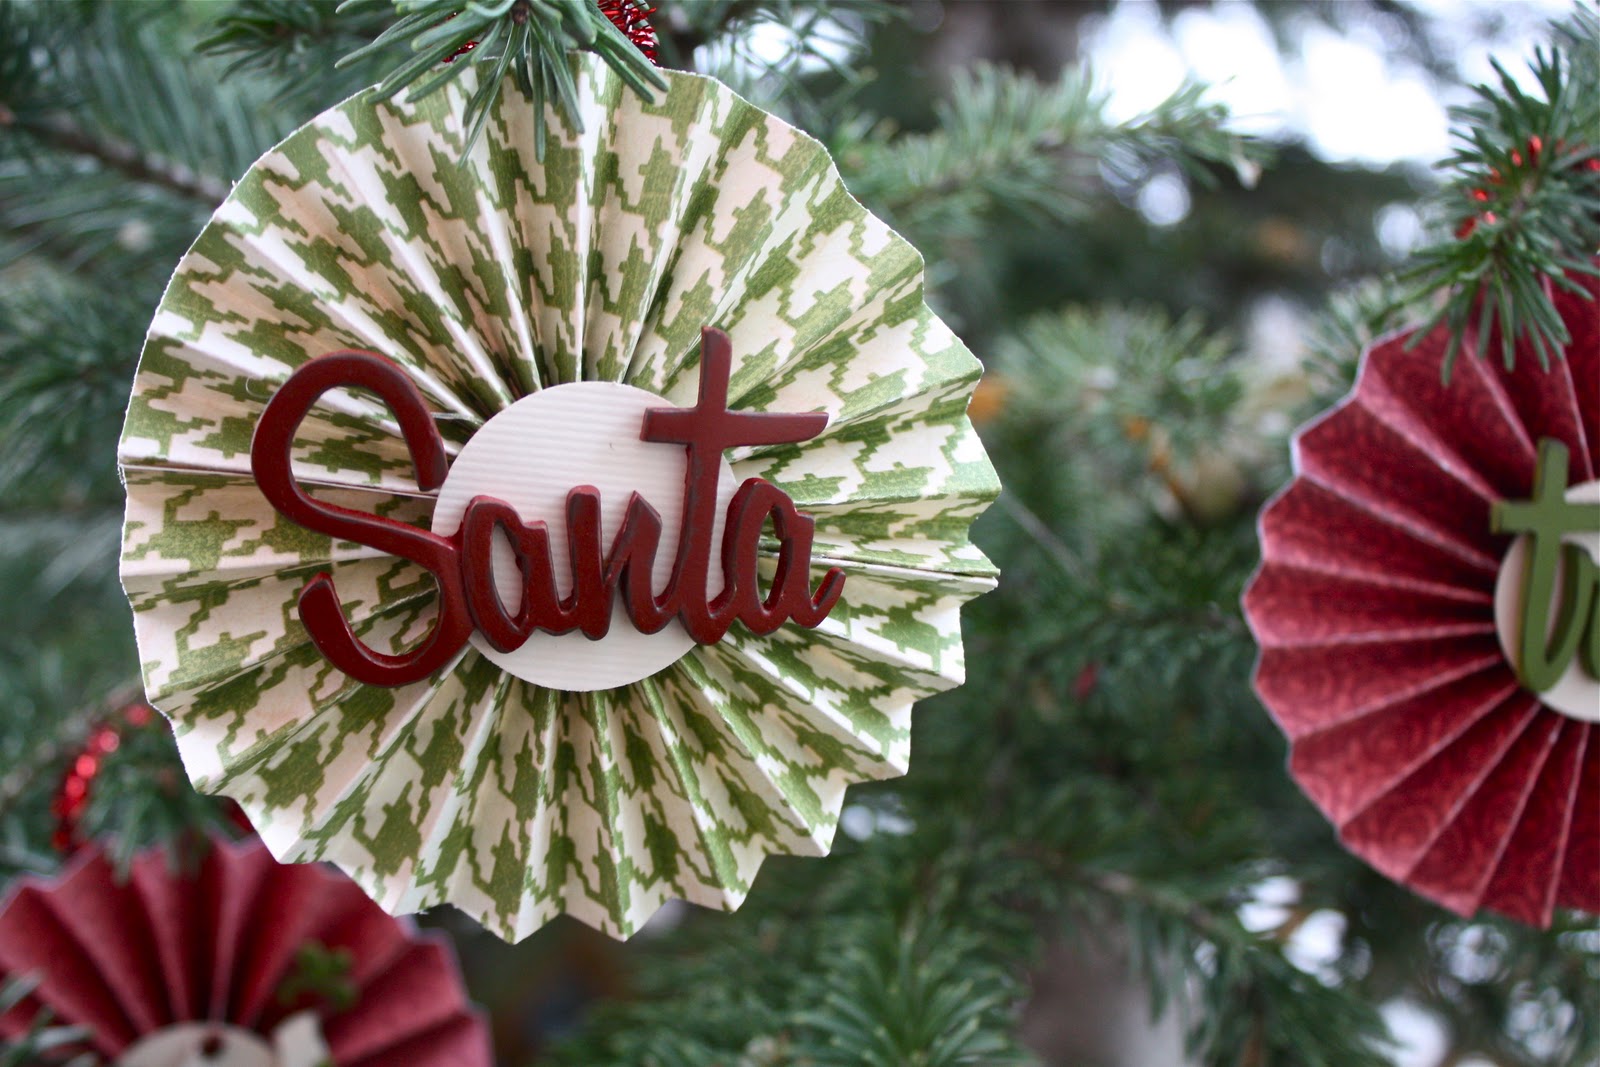 Paper Christmas Decorations You Can Make at Home